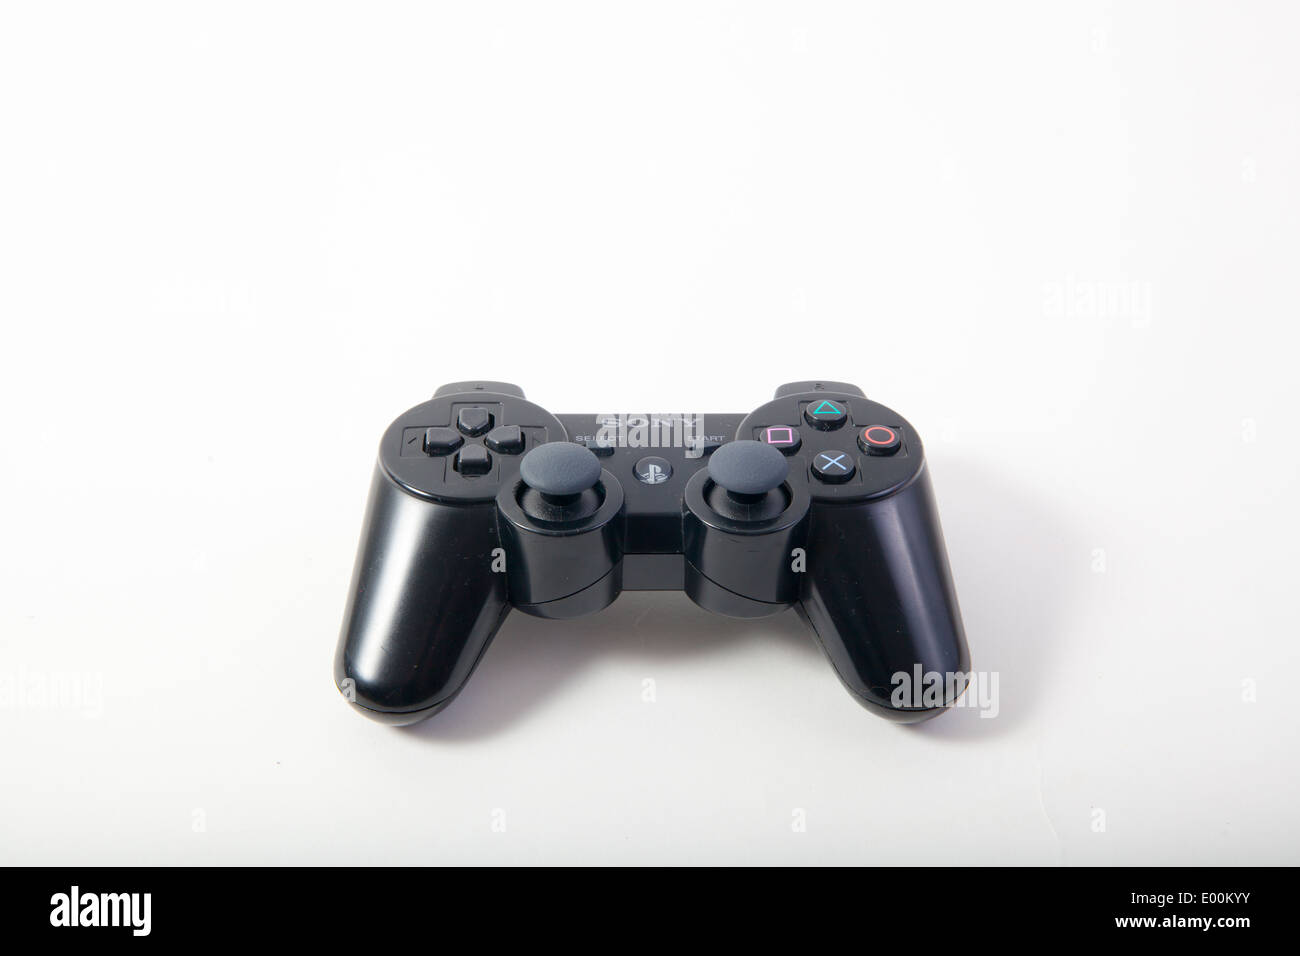 Sony Playstation 3 and 4 original authentic black gaming controllers on a white studio background. Stock Photo